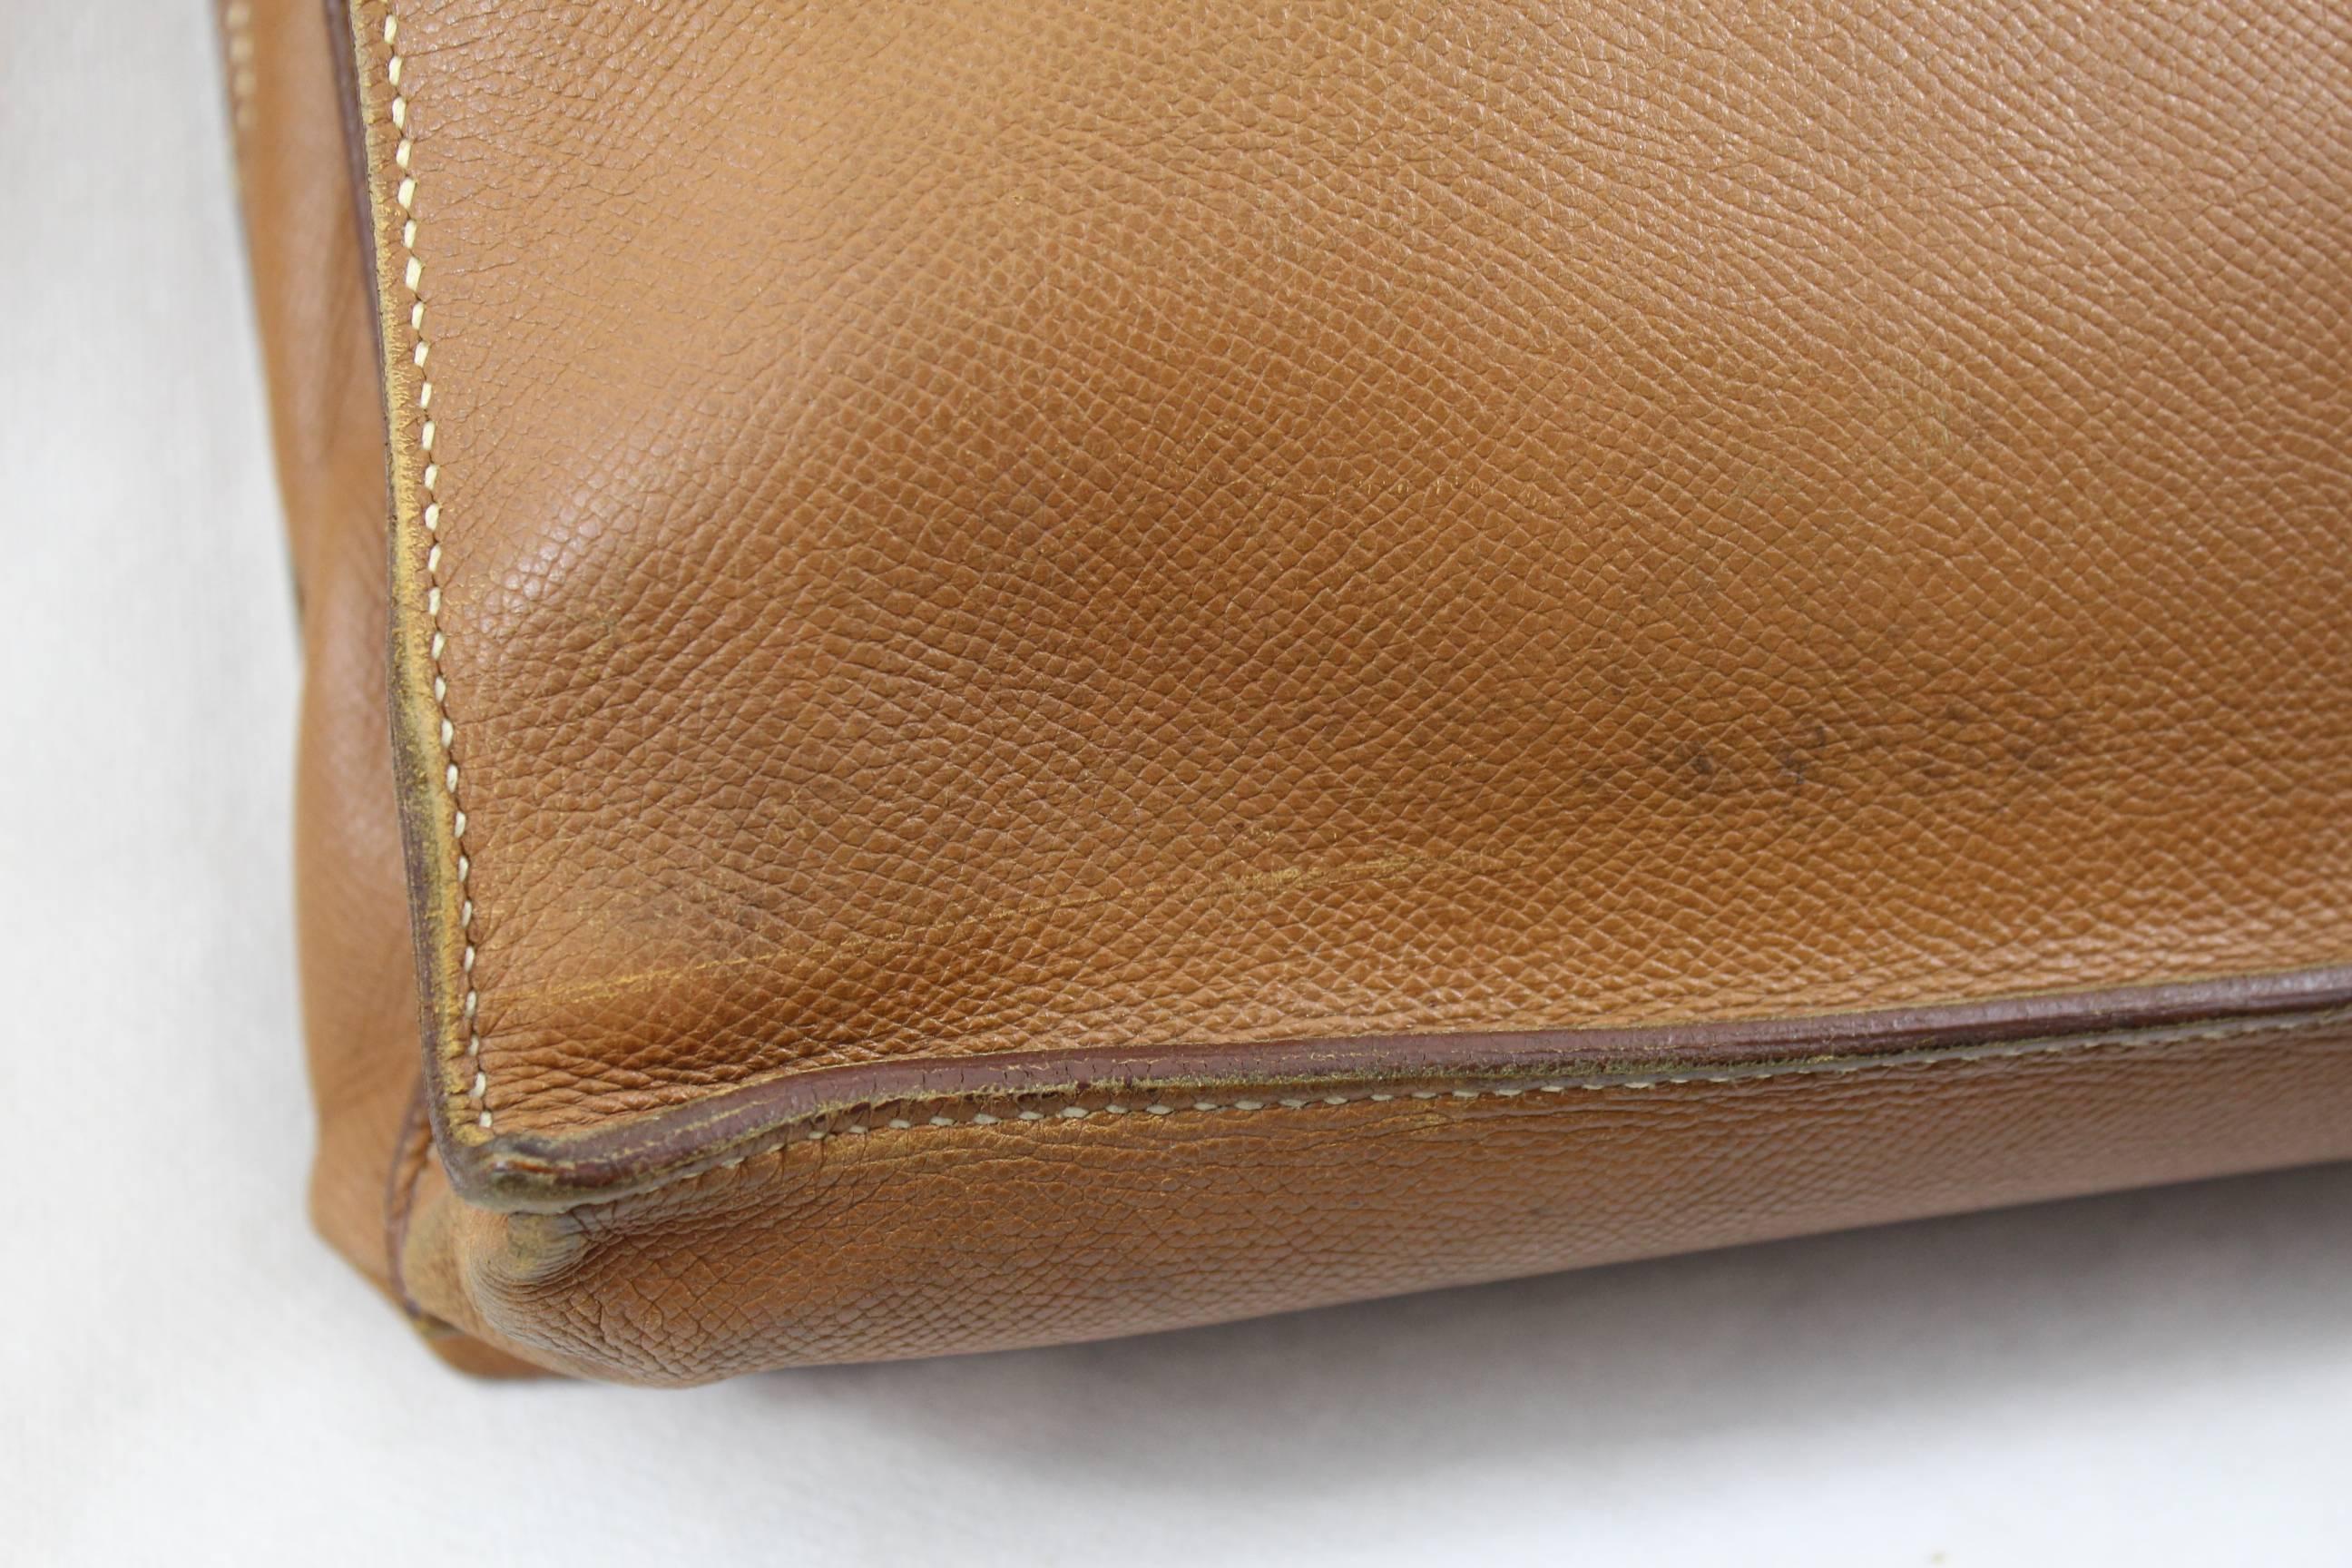 Hermes Vintage Sac a Depeches Briefcase in golden graned leather 2